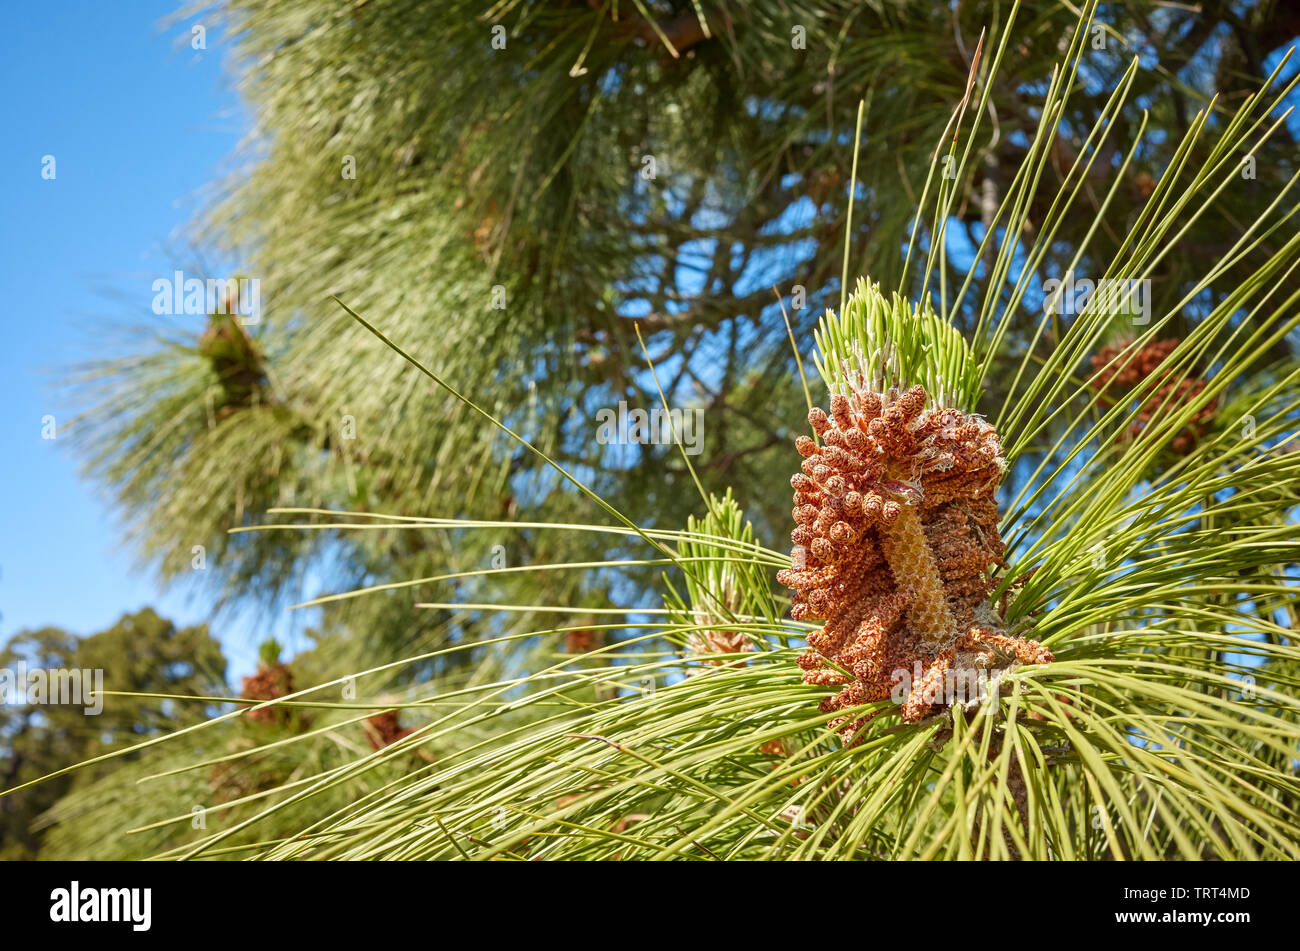 Close up picture of Canary Island pine (Pinus canariensis) in Teide National Park, Tenerife, Spain. Stock Photo